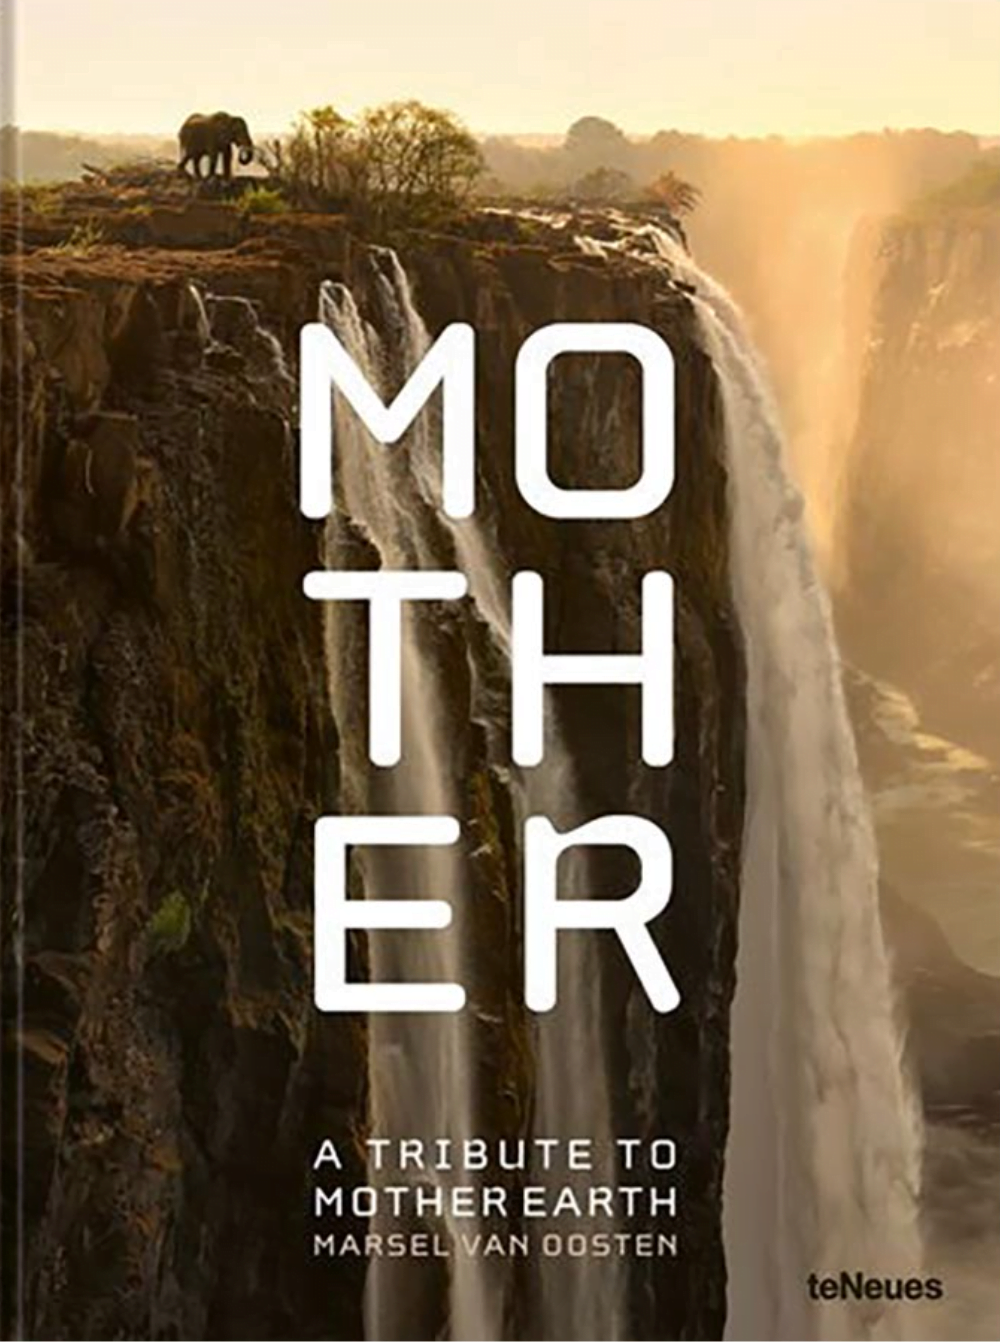 Mother: A tribute to mother earth - Marsel van Oosten